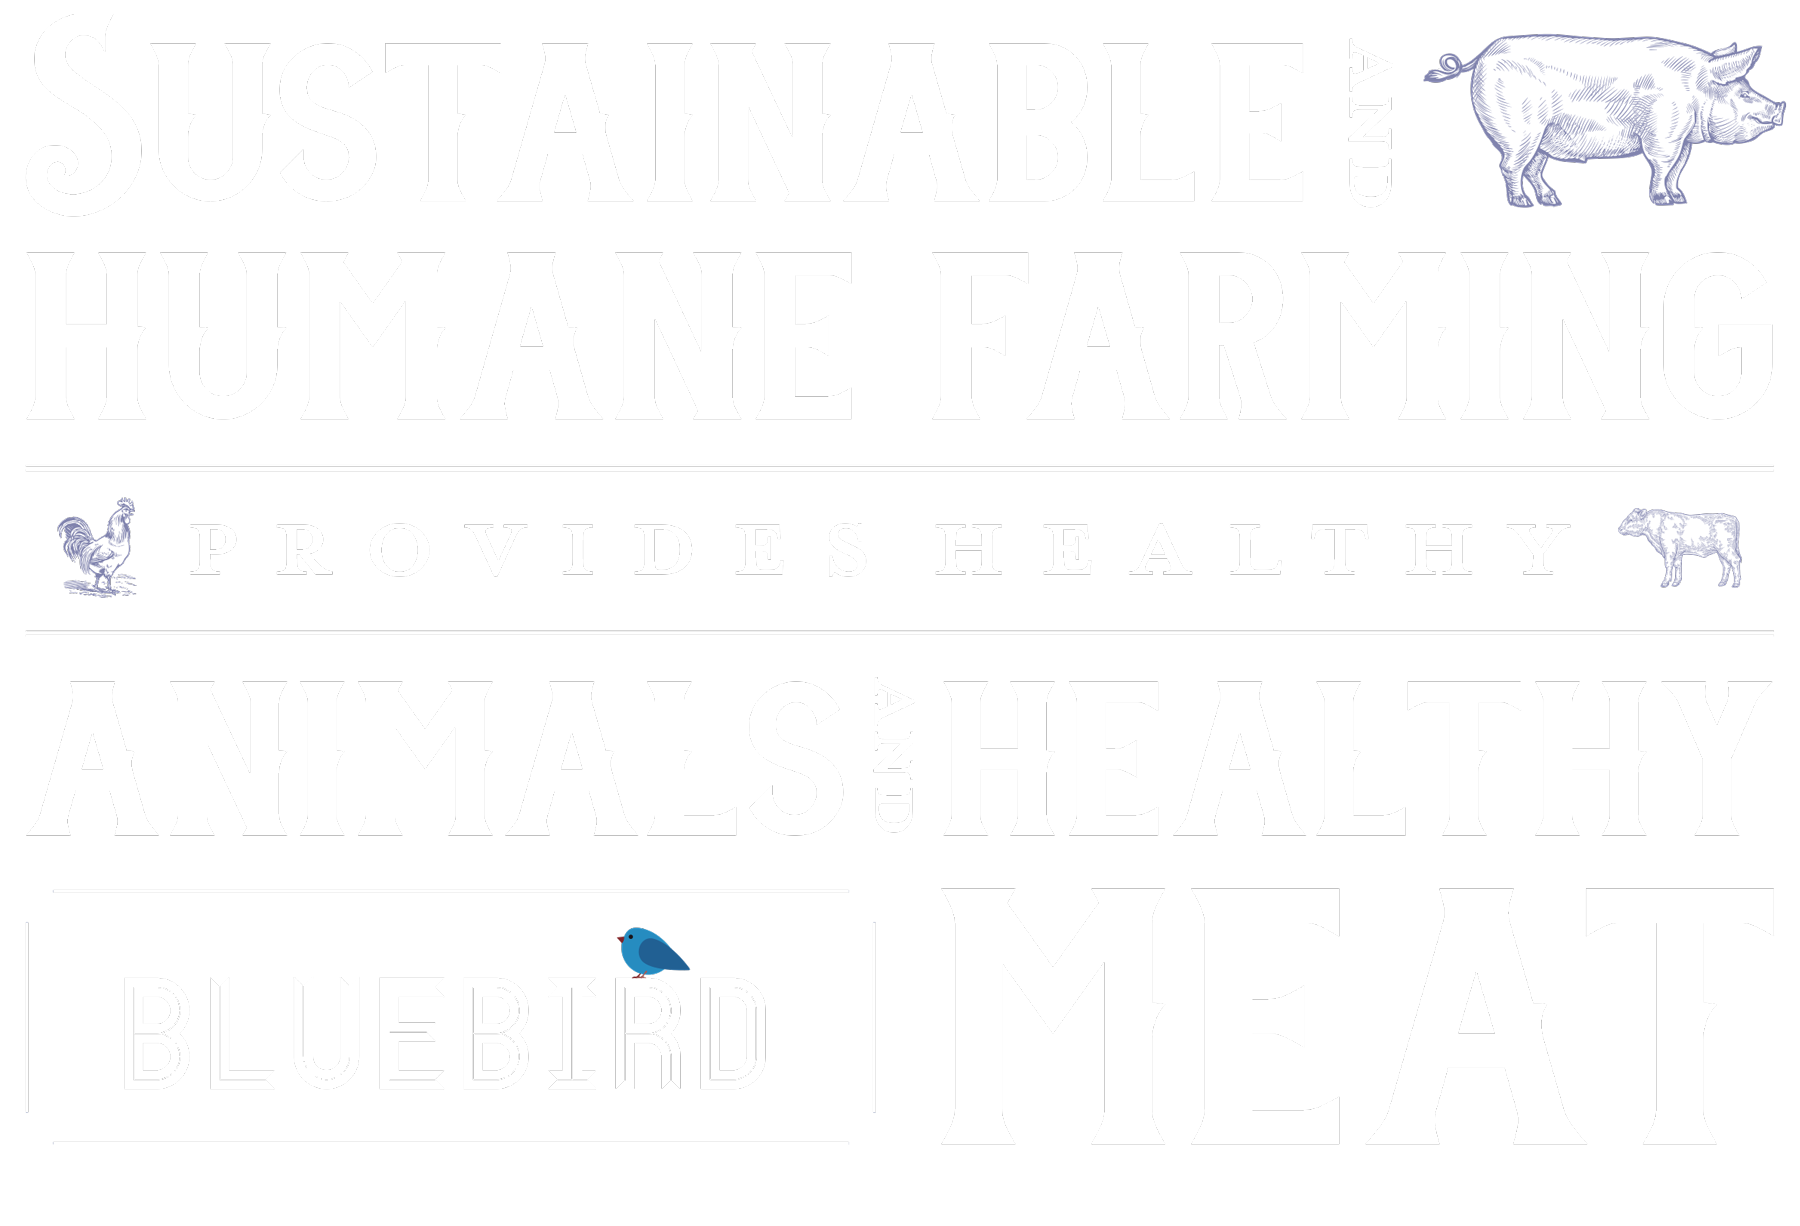 Sustainable and humane farming provides healthy animals and healthy meat